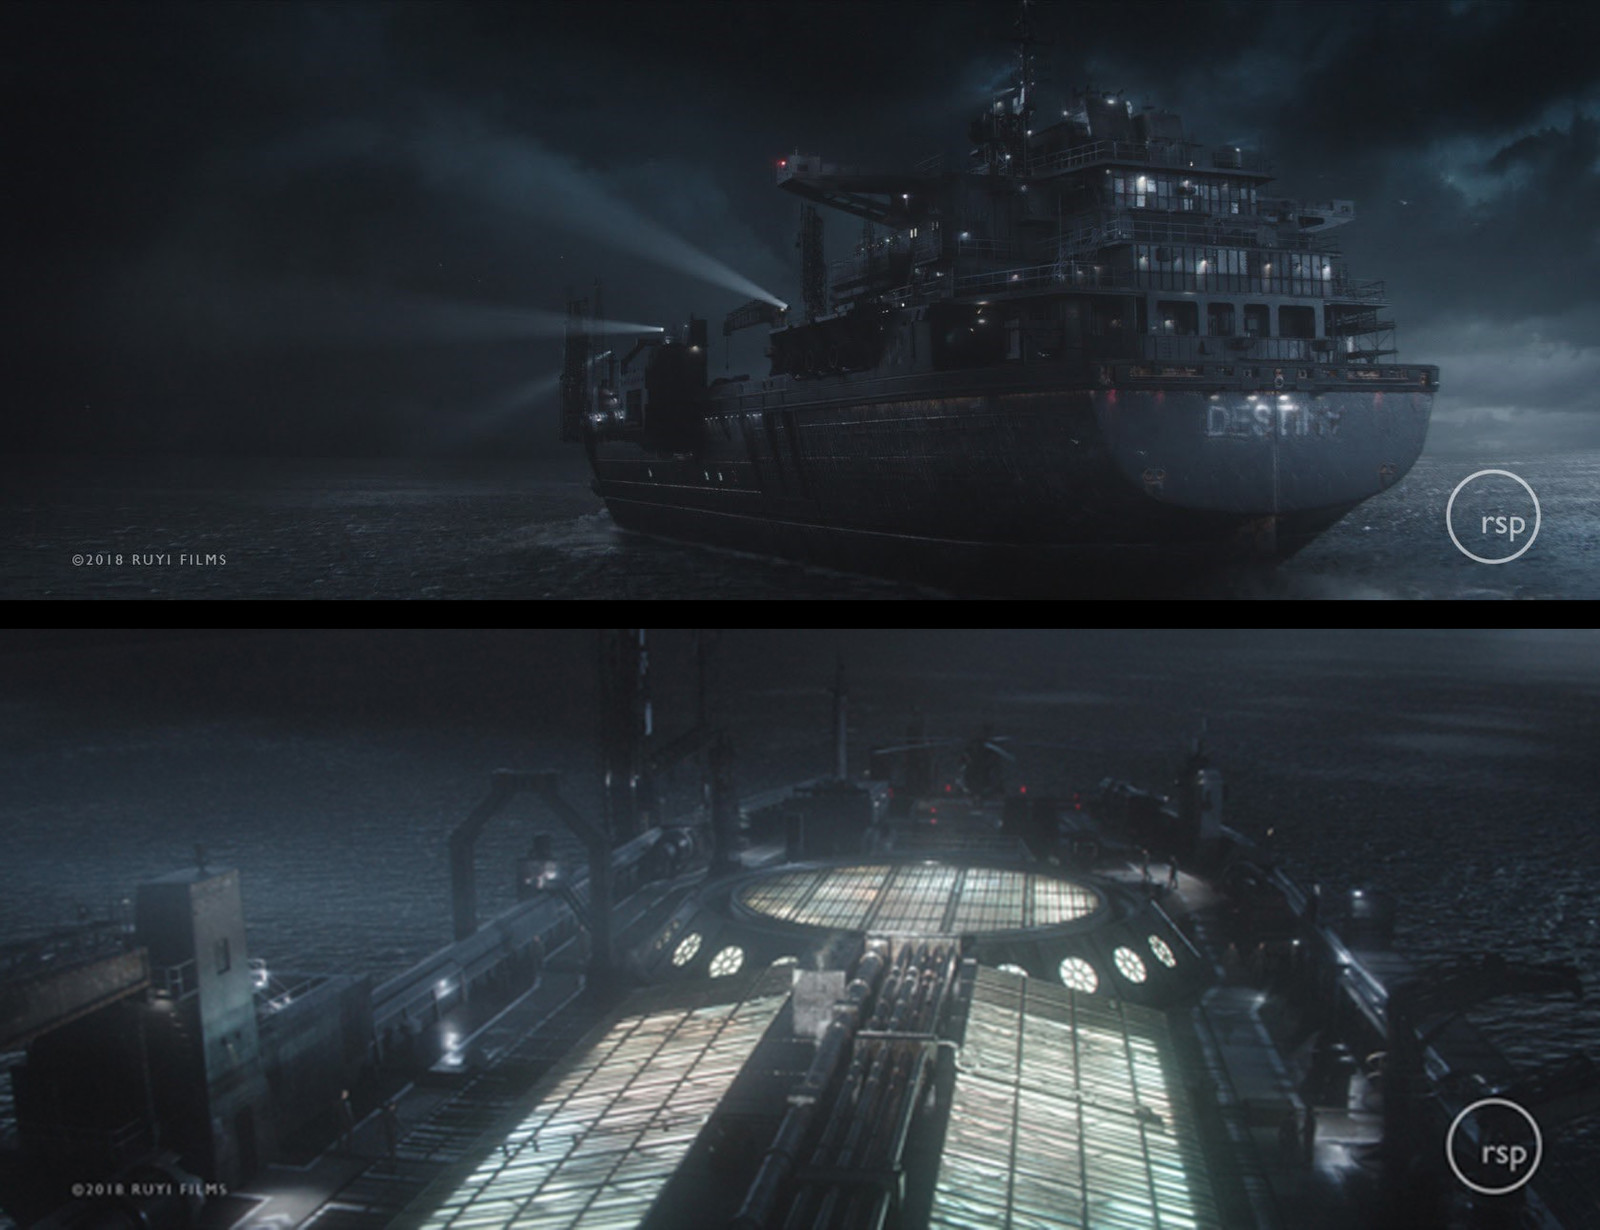 Screen caps from the movie. Production team did a beautiful work. 